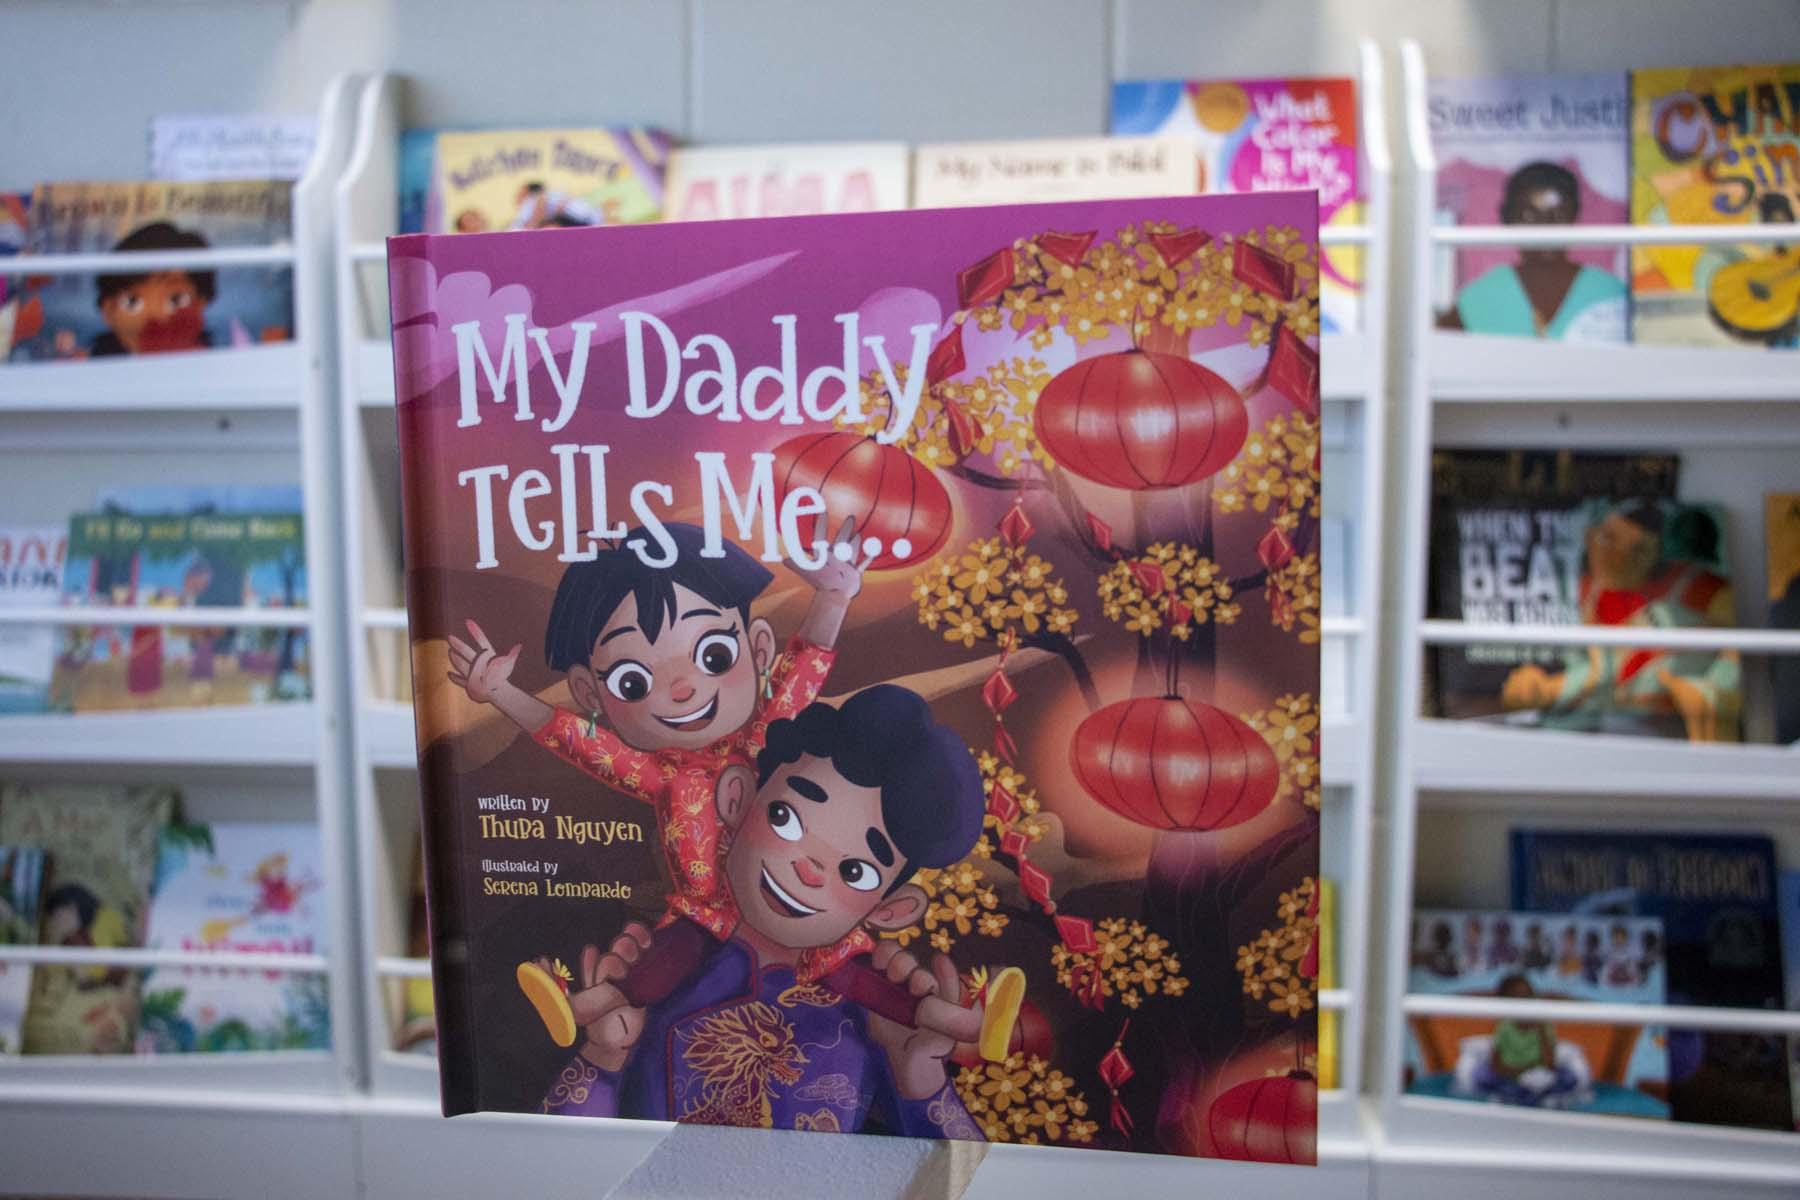 Picture of "My Daddy Tells Me" a children's book by Thuba Nguyen